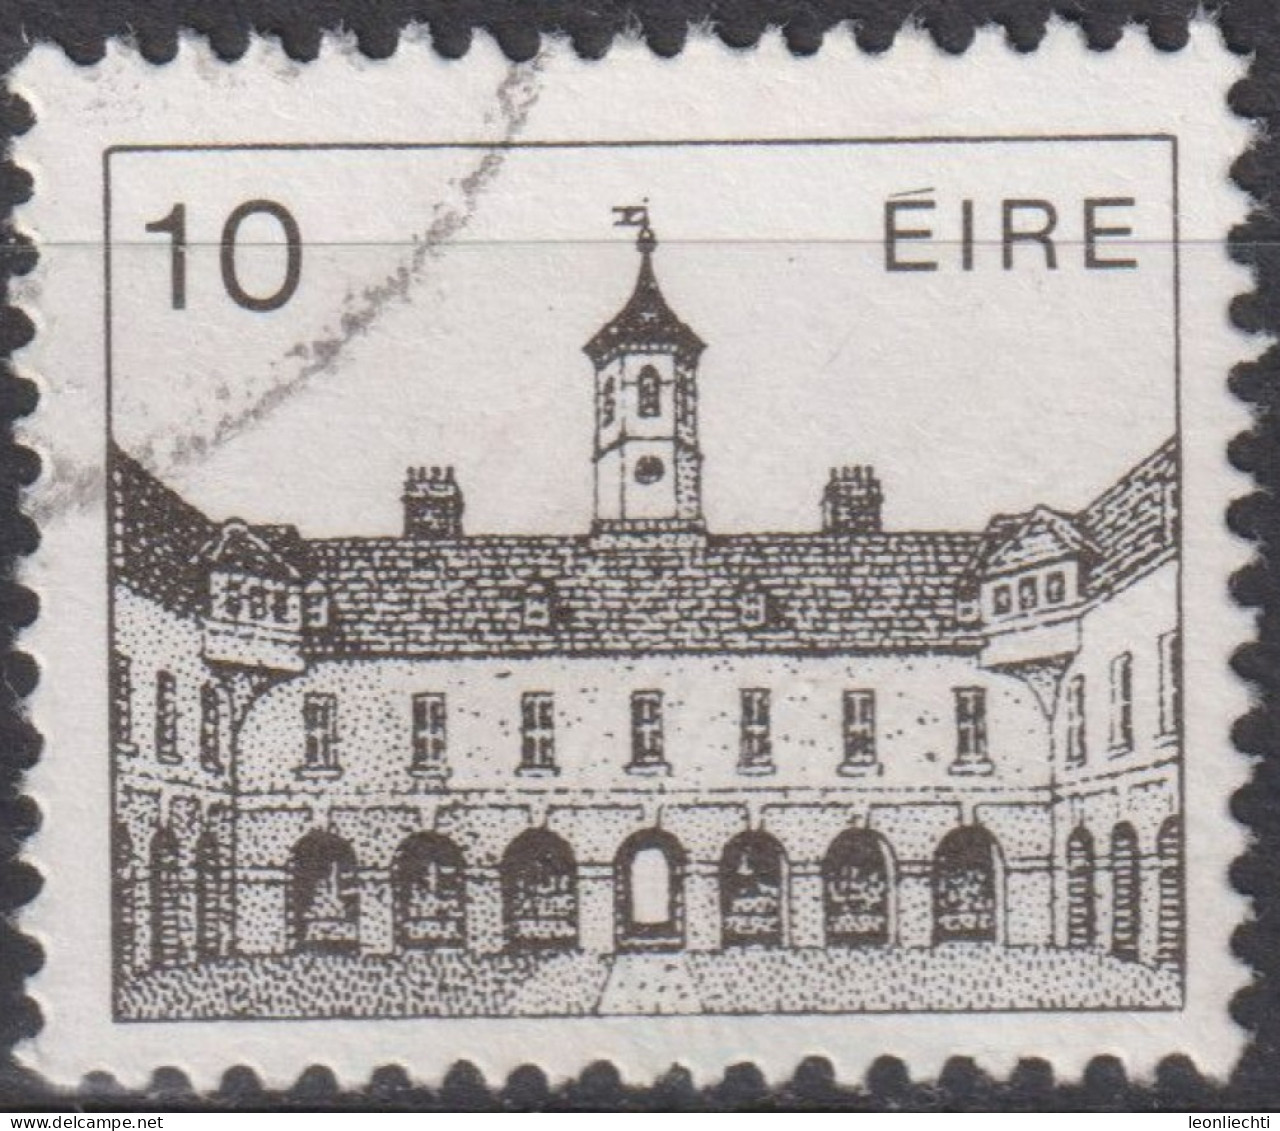 1983 Republik Irland ° Mi:IE 491A, Sn:IE 544, Yt:IE 515, Dr. Steevens Hospital Dublin (1733) - Used Stamps